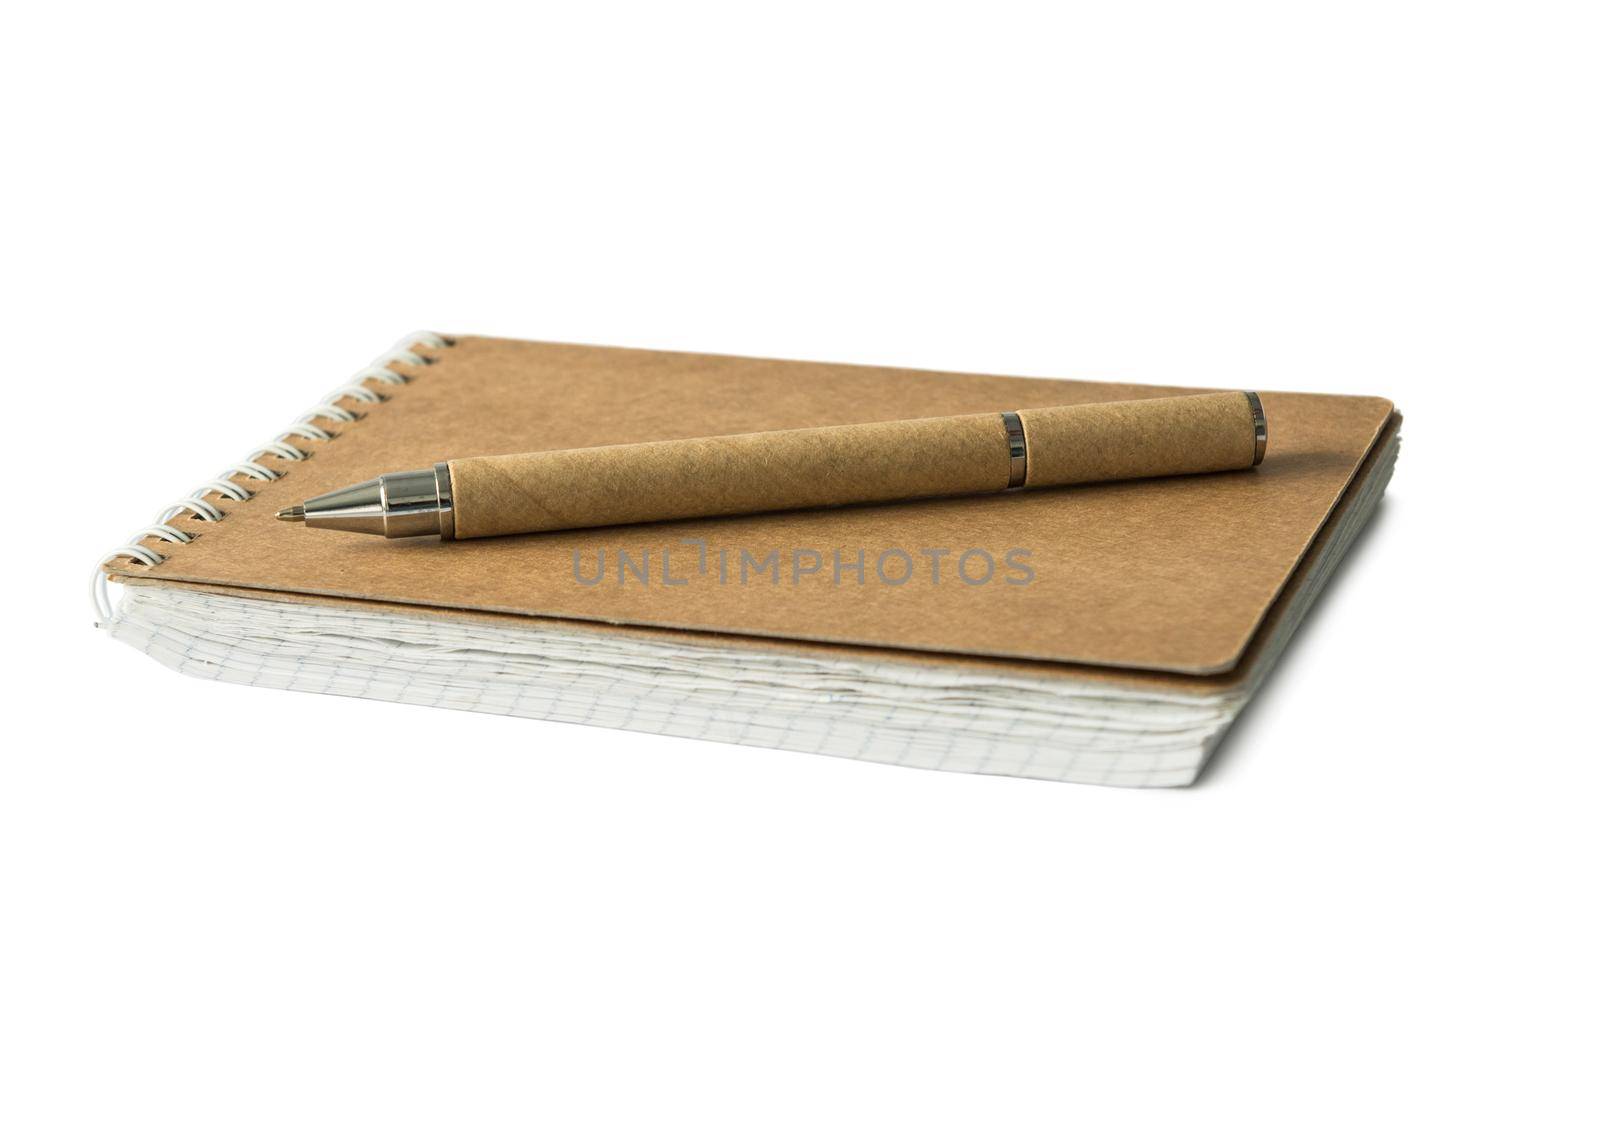 eco notebook and pen with carton covers by tan4ikk1